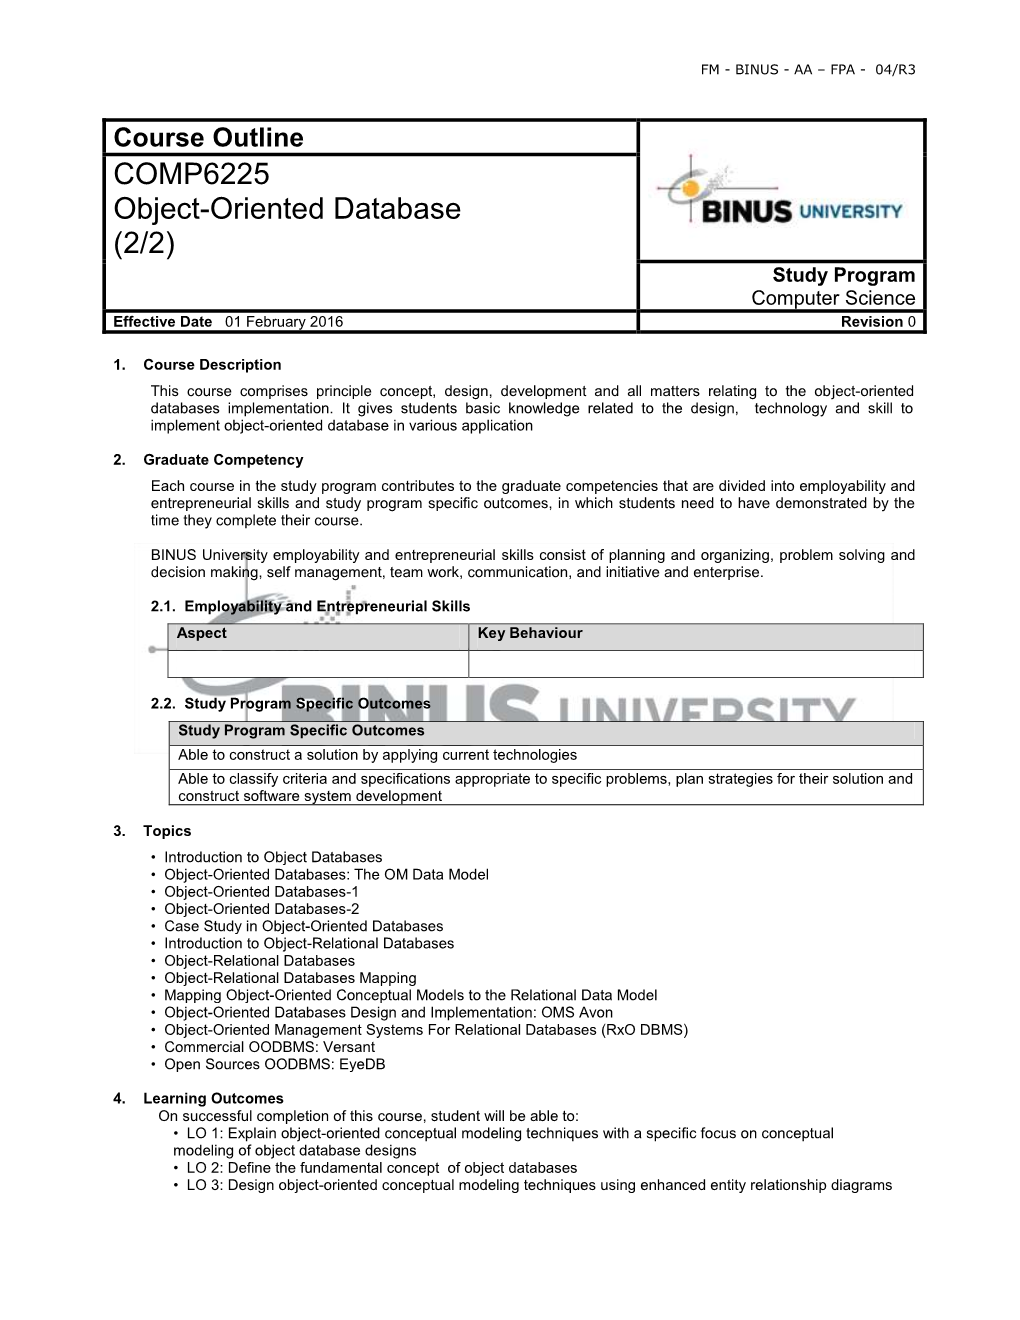 Course Outline COMP6225 Object-Oriented Database